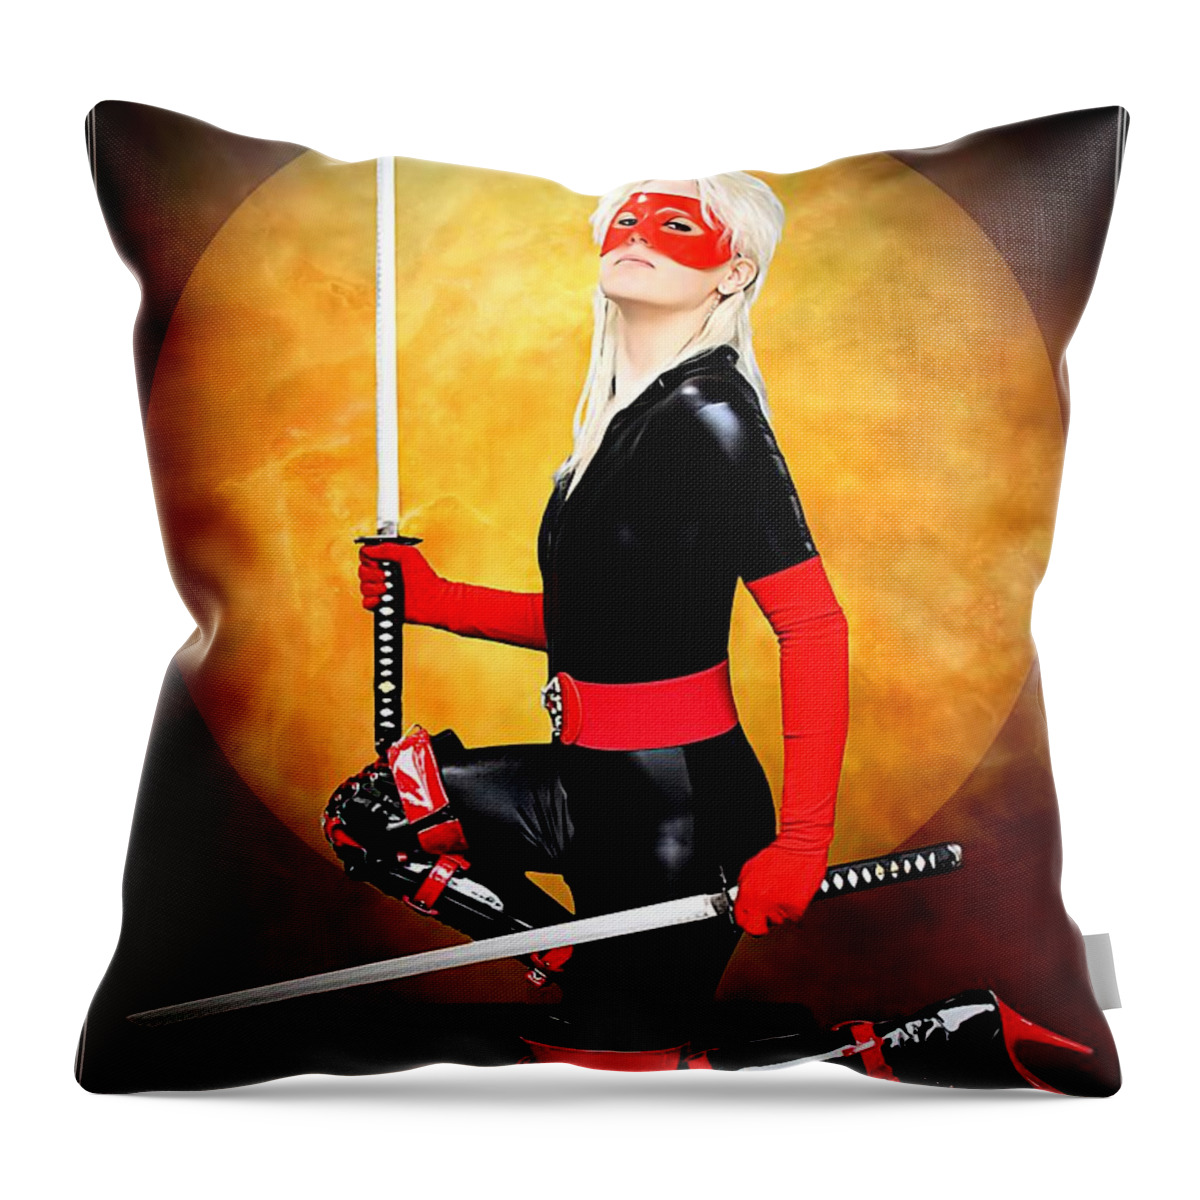 Fantasy Throw Pillow featuring the painting Under A Blood Moon by Jon Volden